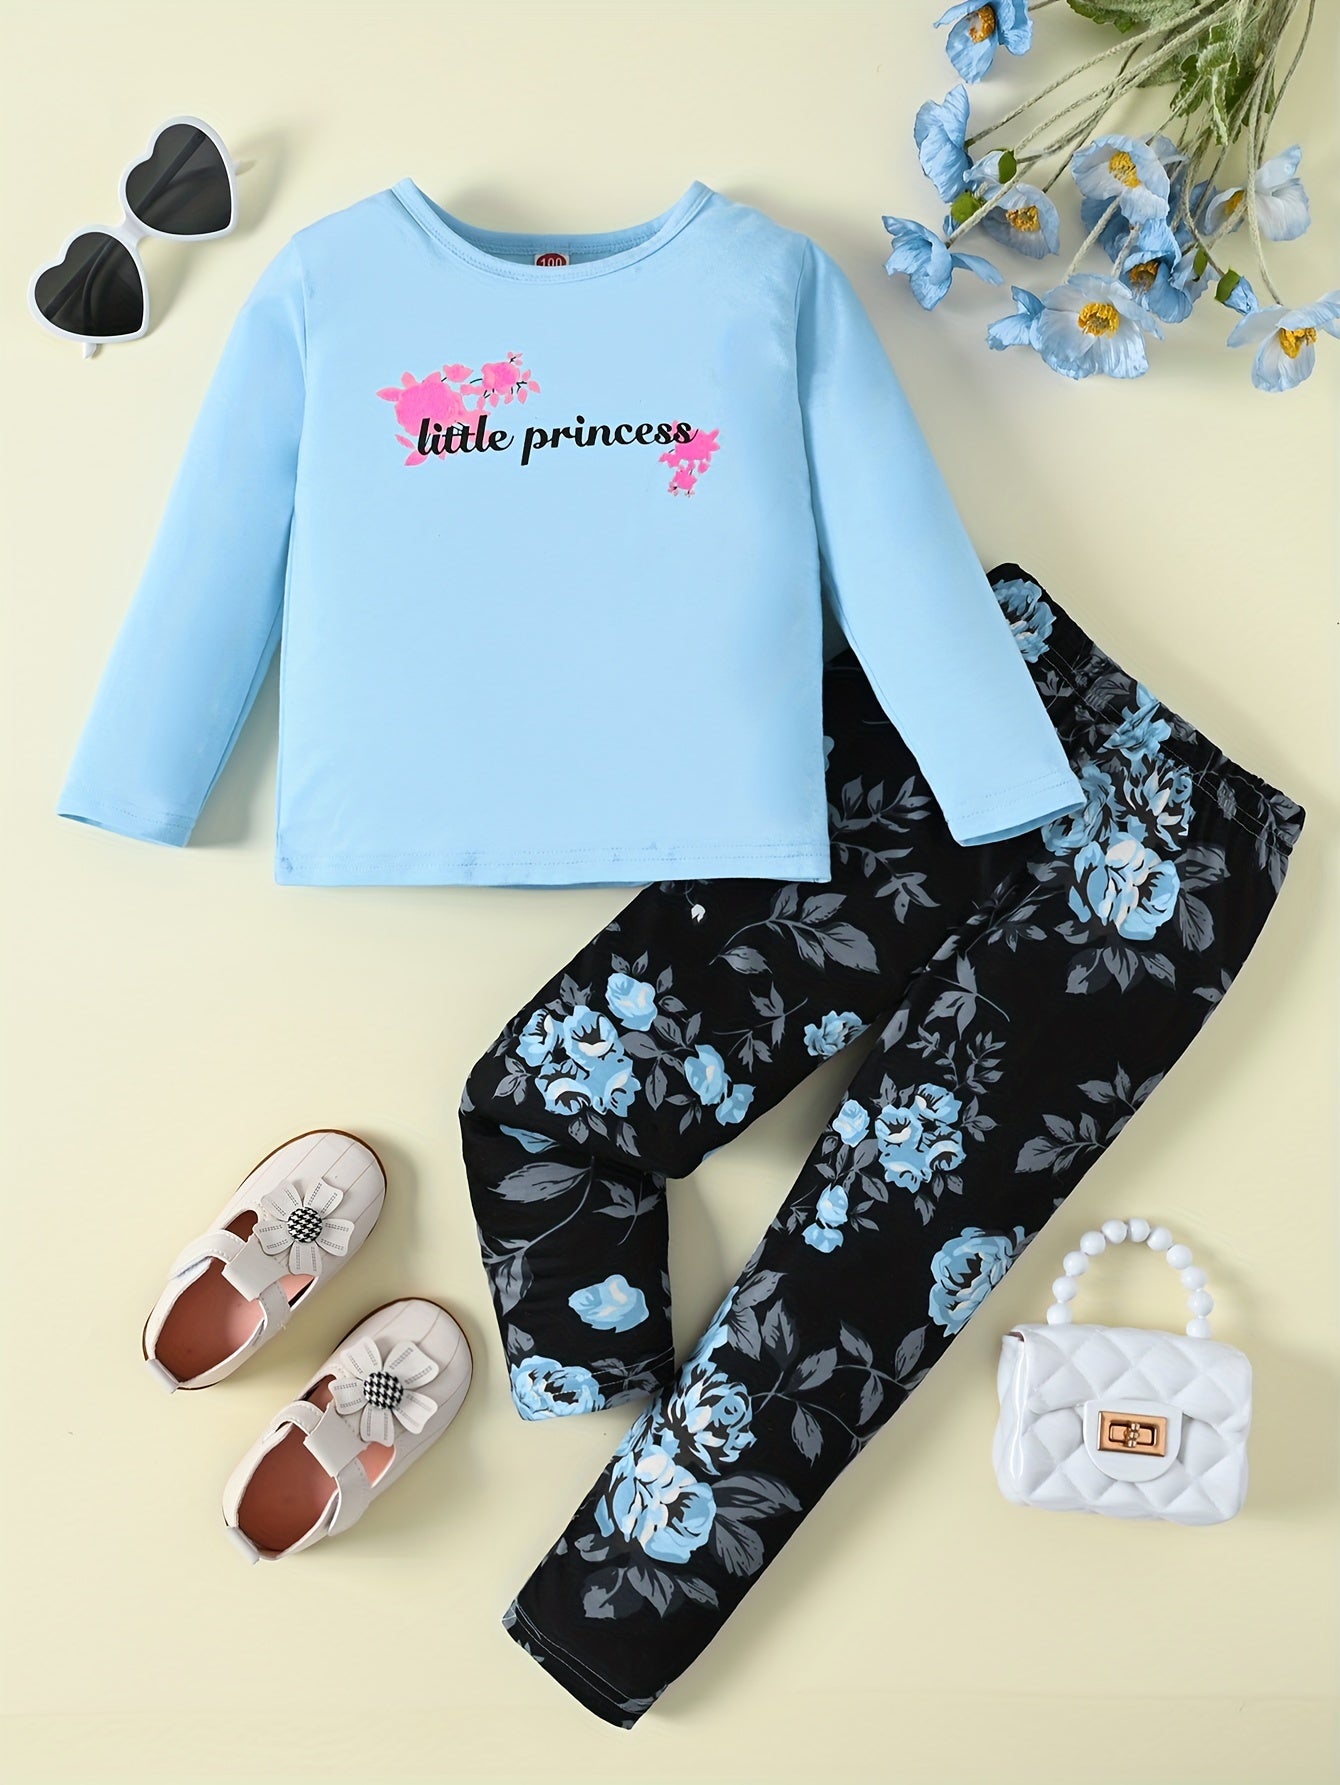 Girl's Floral Pattern Outfit 2pcs, Long Sleeve Top & Leggings Set, LITTLE PRINCESS Print Kid's Clothes For Spring Fall